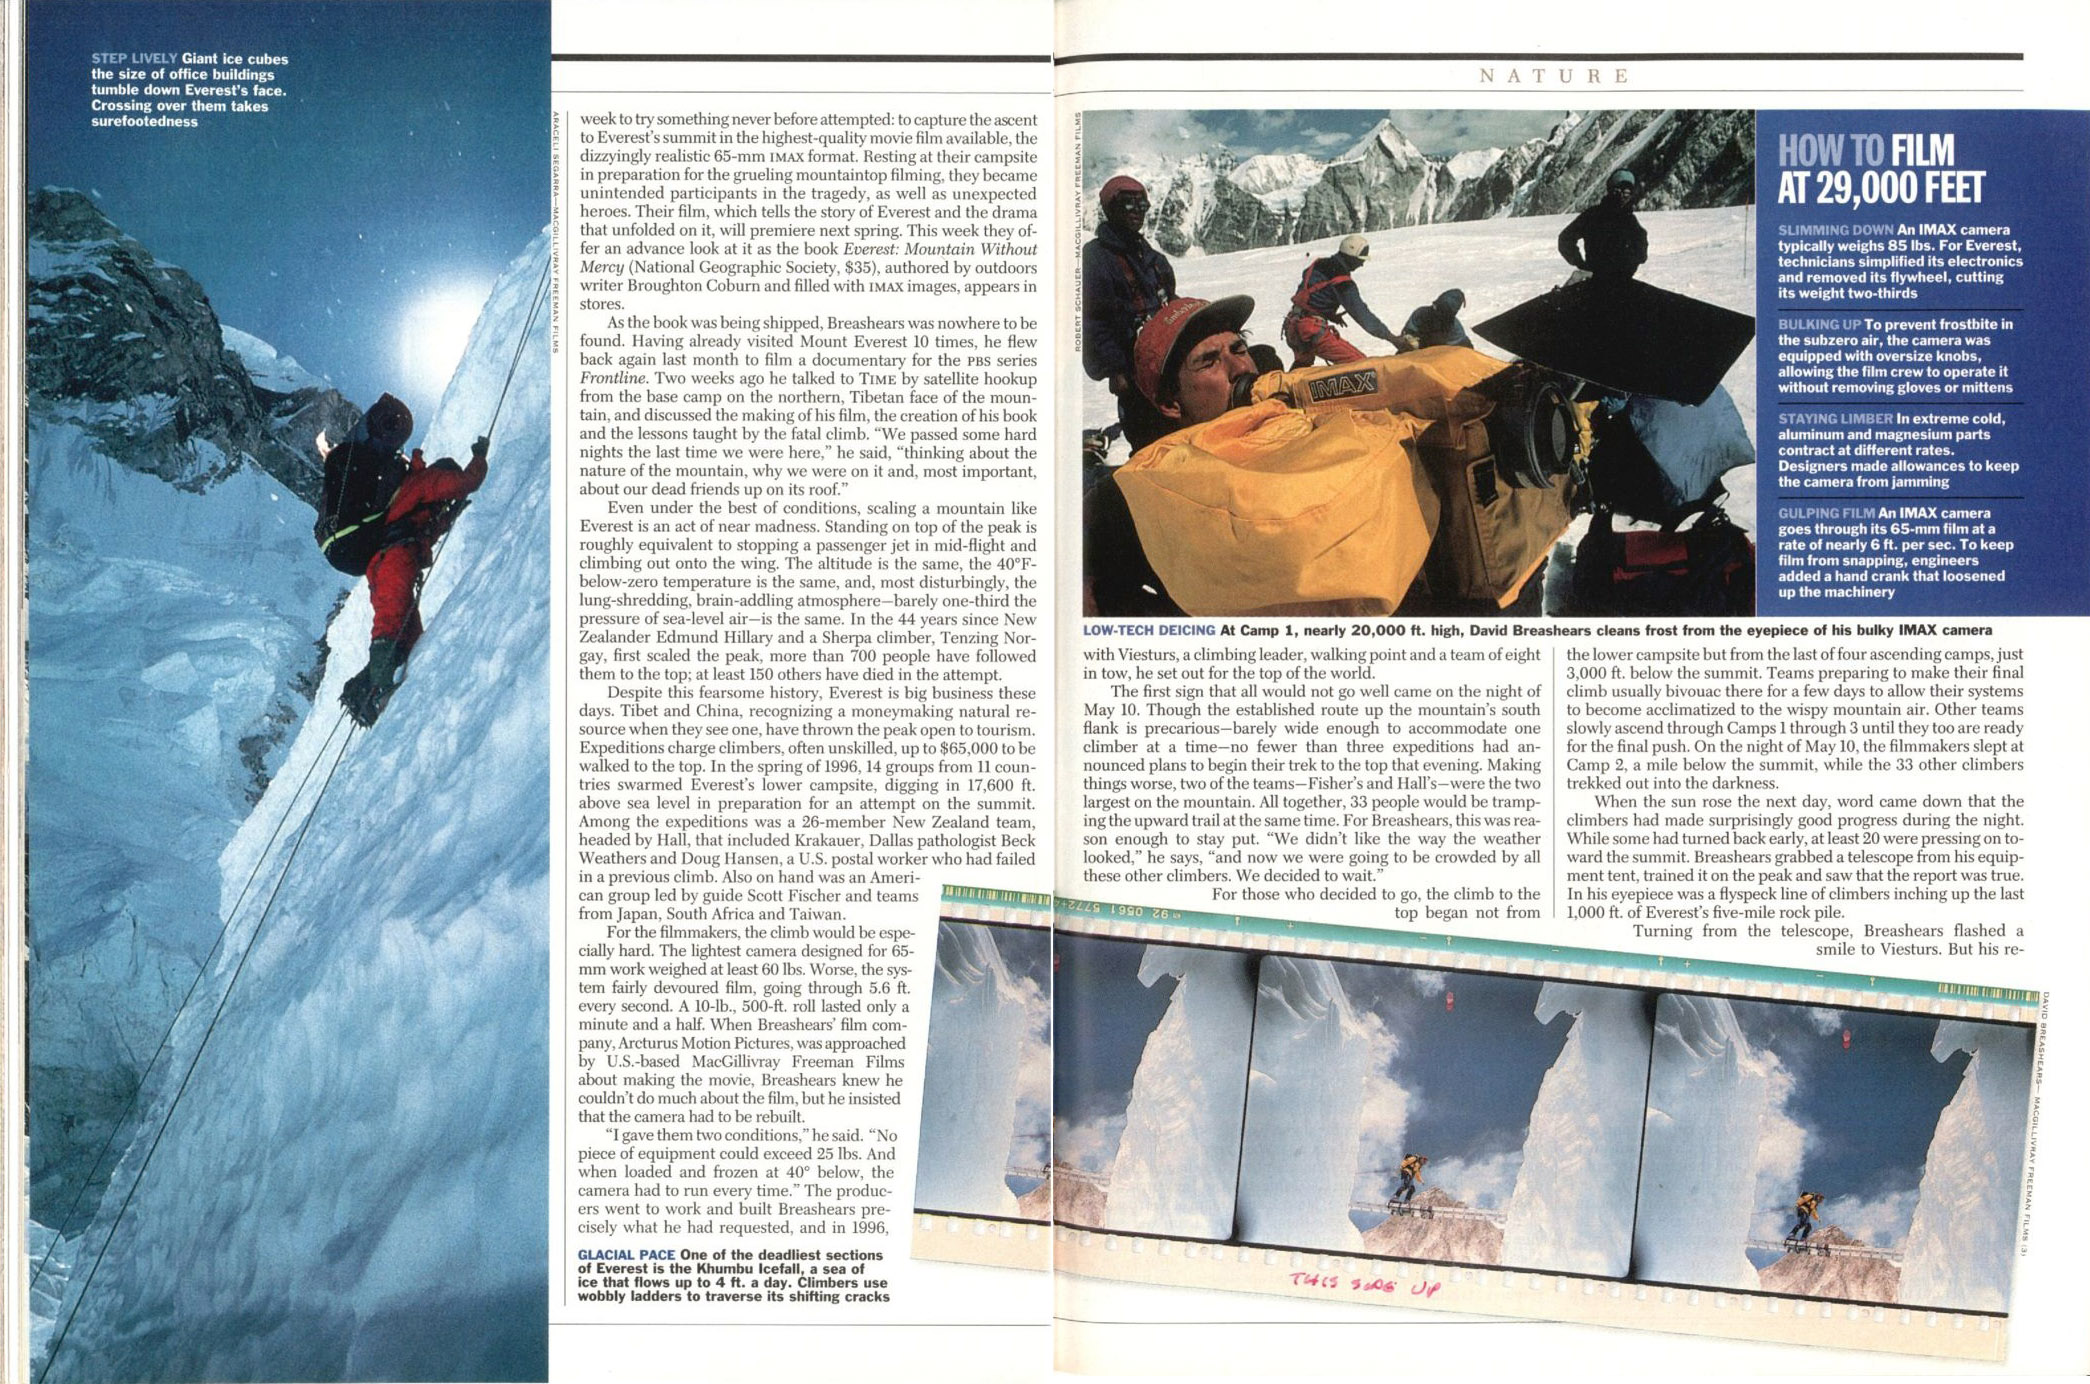 A spread from the Oct. 20, 1997, issue of TIME